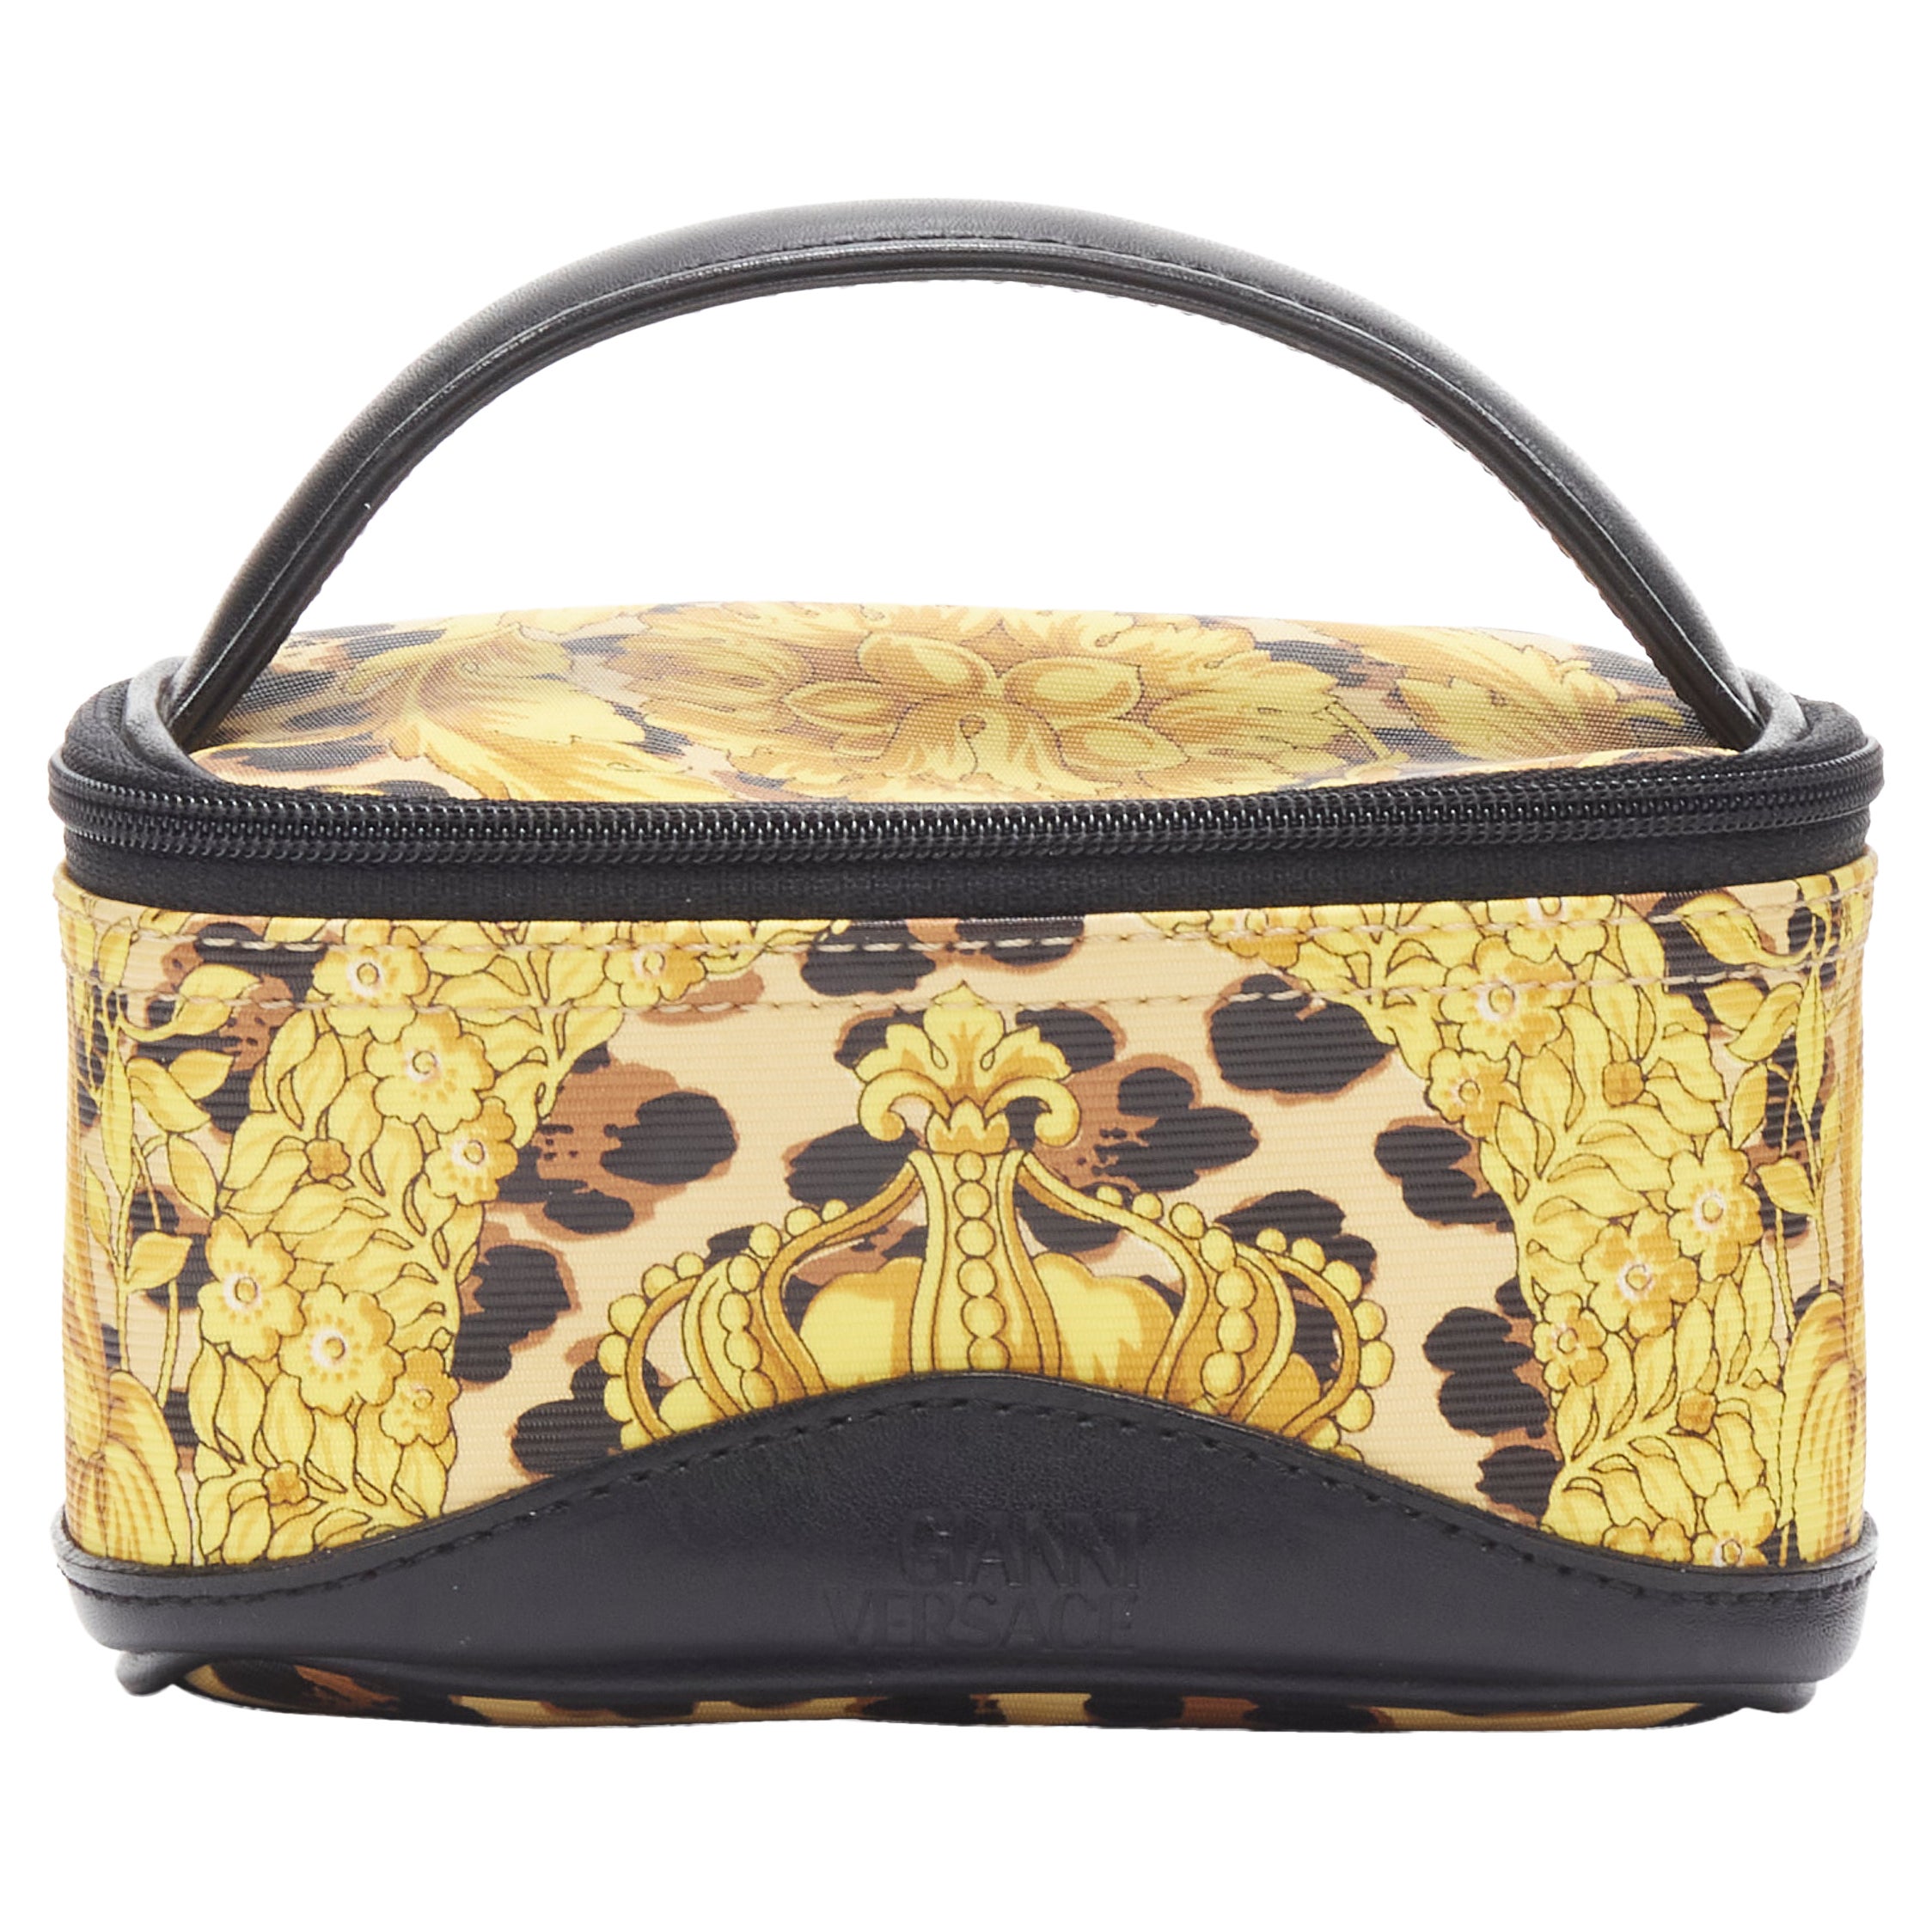 GIANNI VERSACE gold barocco baroque leopard print leather top handle micro bag For Sale